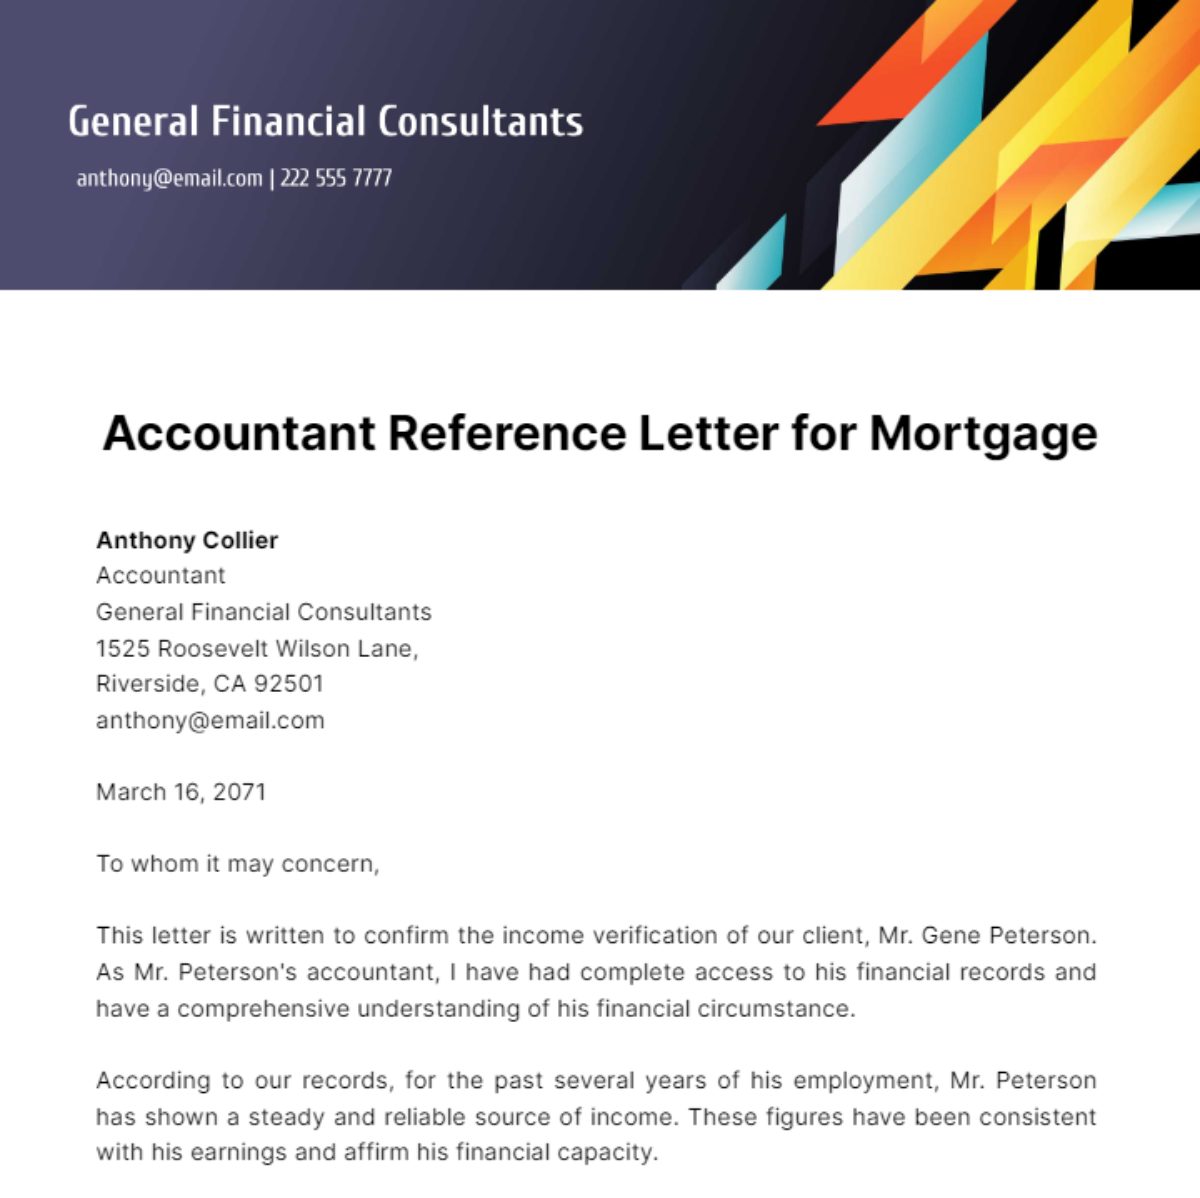 Accountant Reference Letter for Mortgage Template